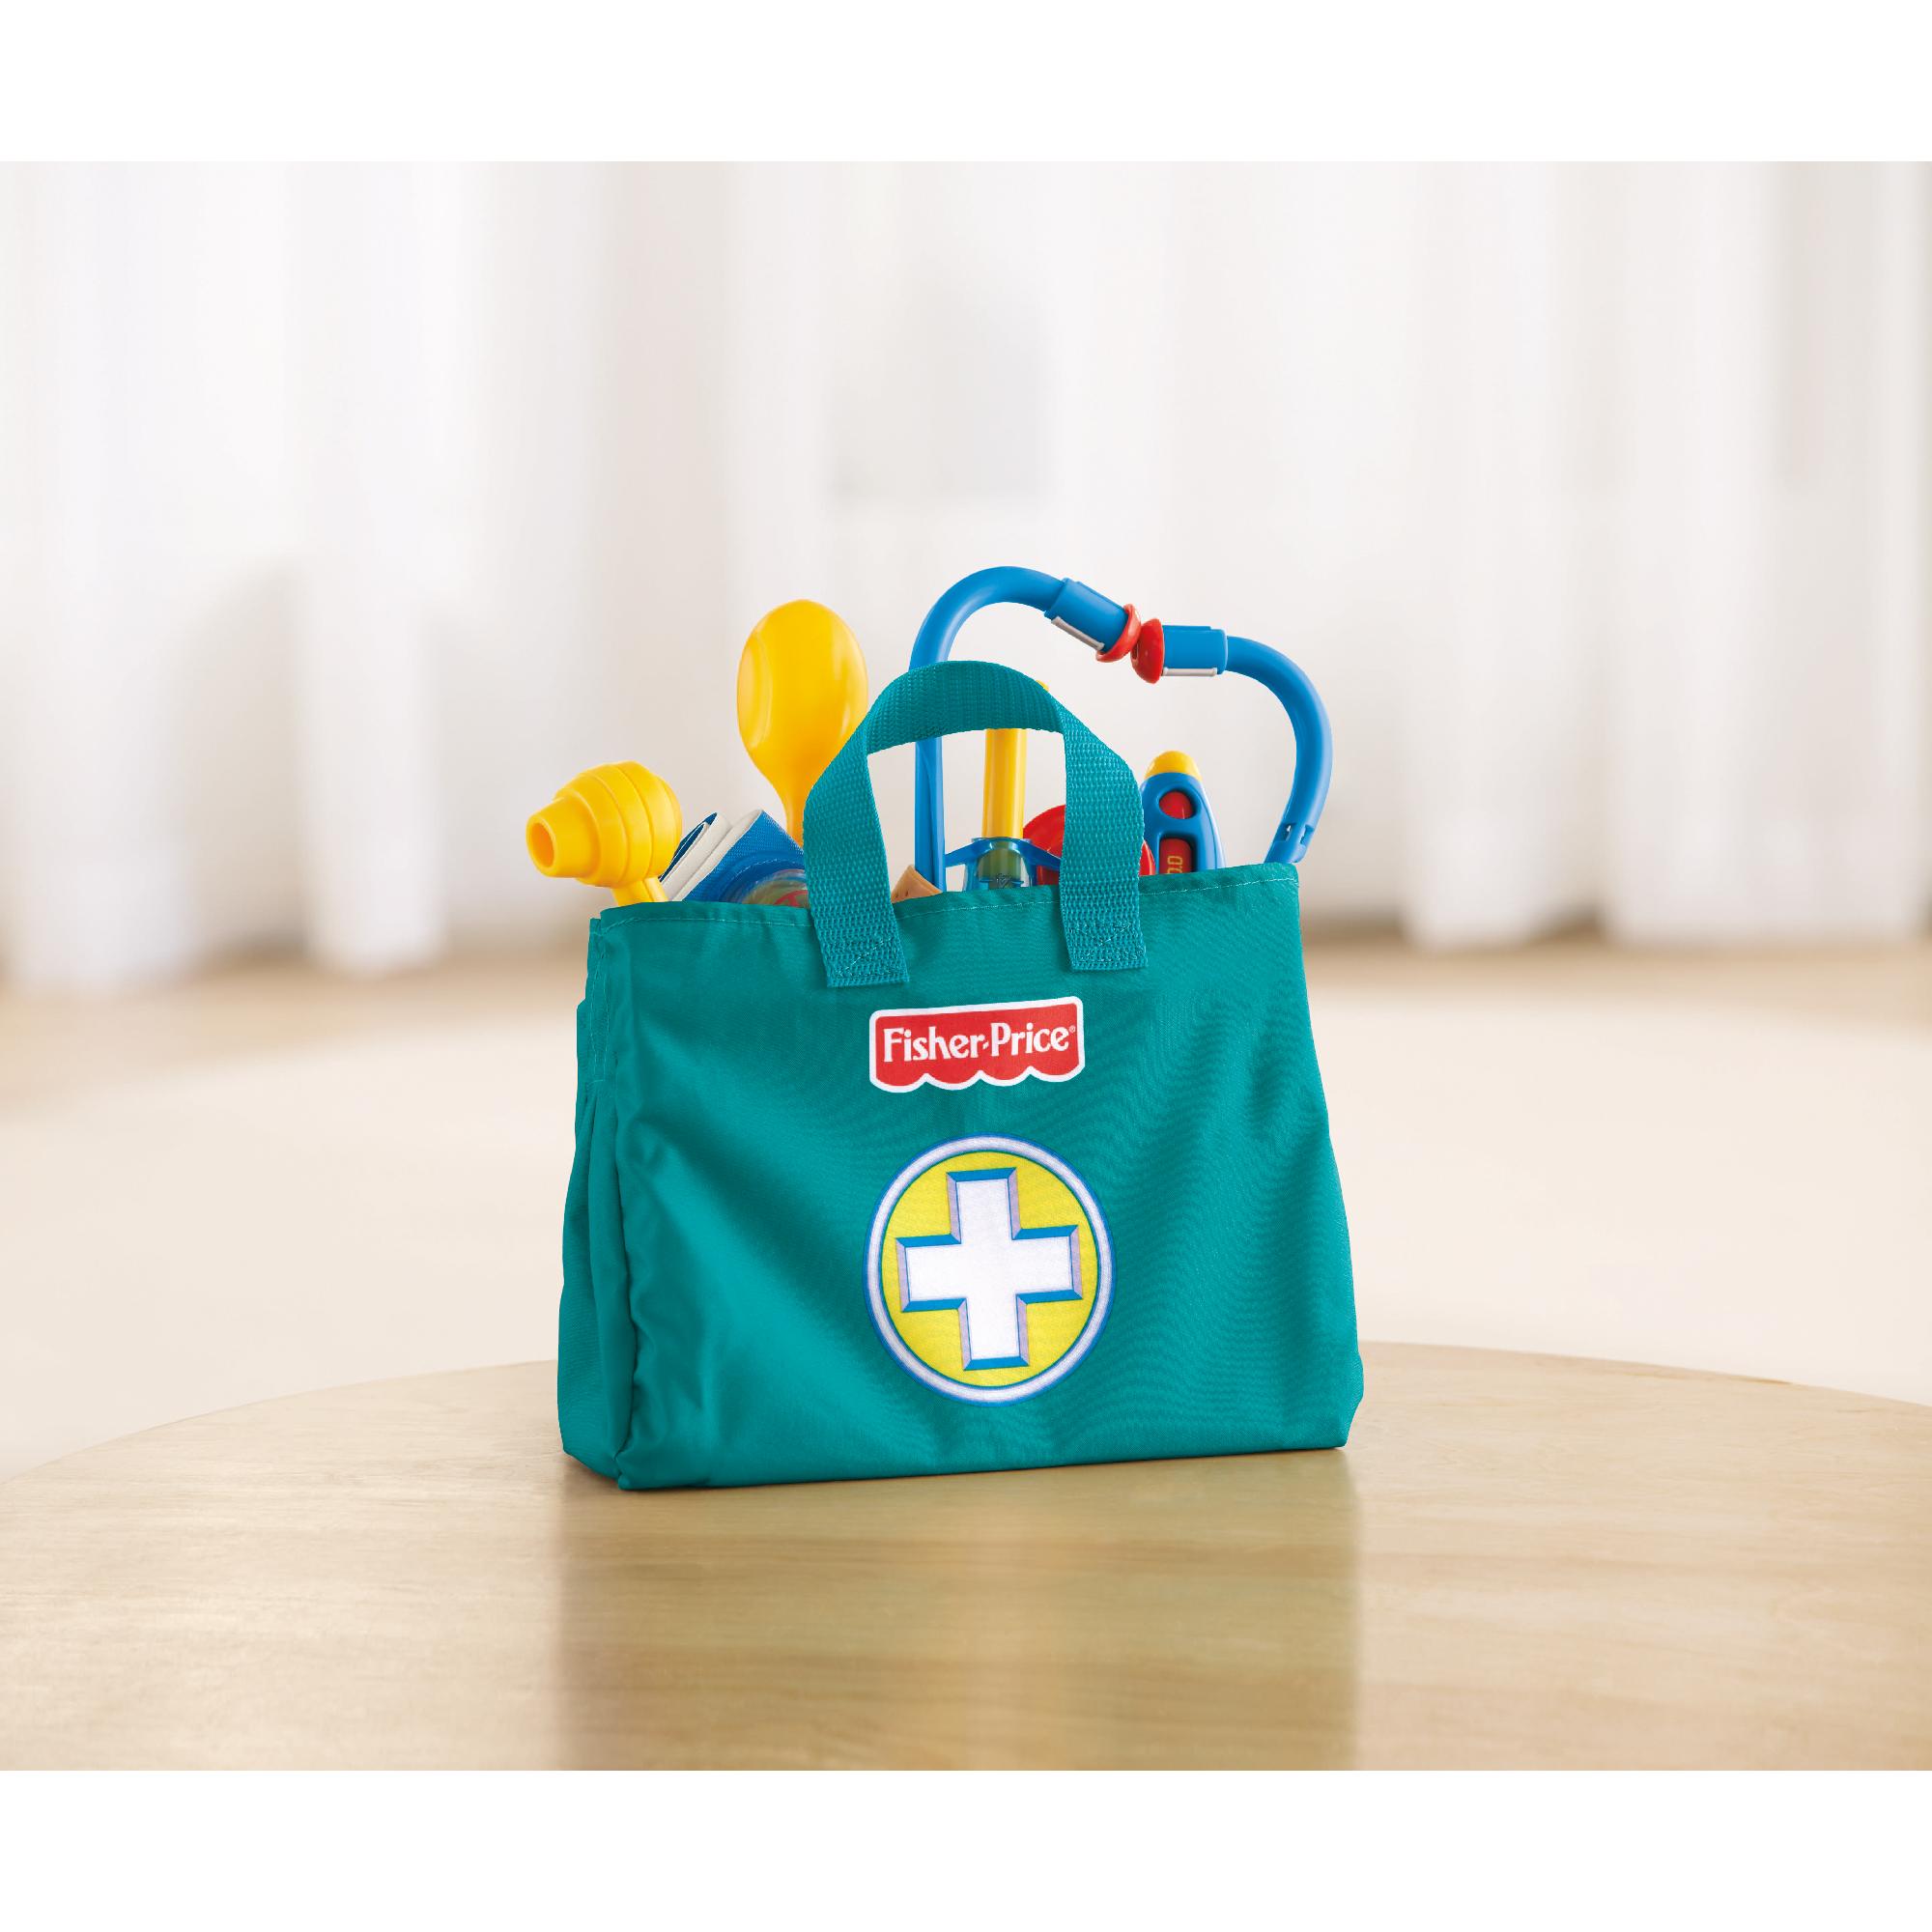 Fisher-Price Medical Kit with Doctor Bag Playset - image 2 of 5